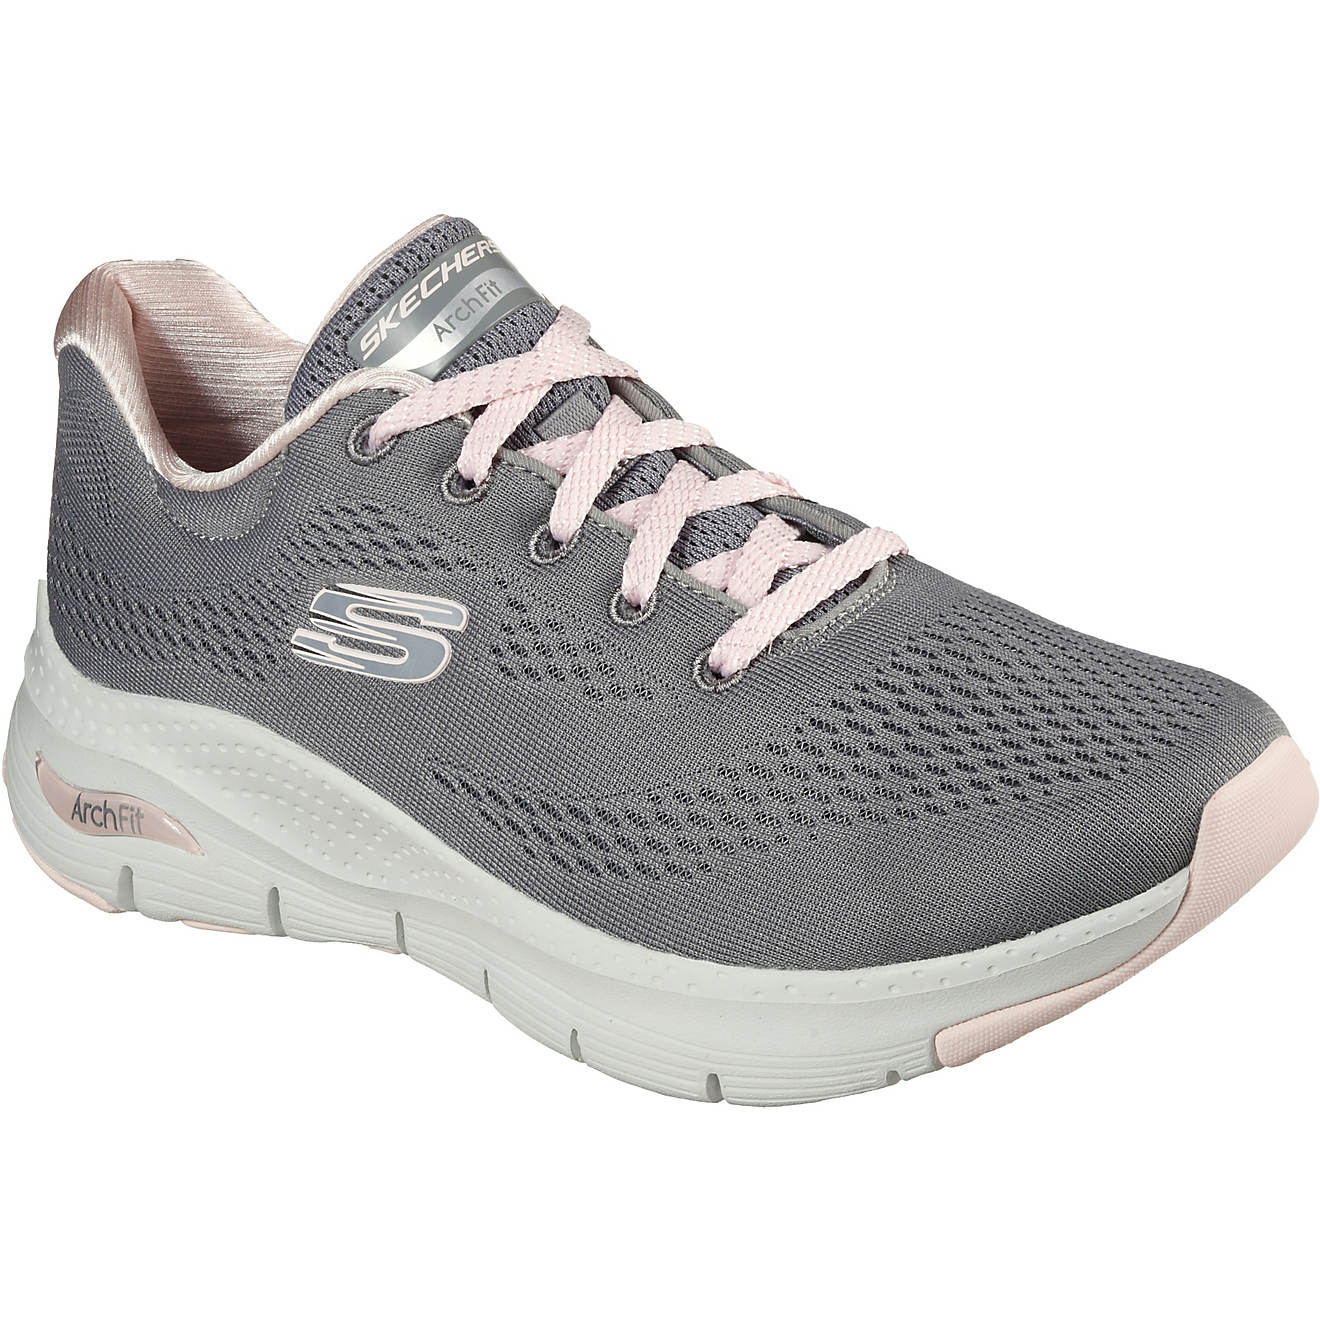 SKECHERS Women's Arch Fit Big Appeal Shoes | Academy